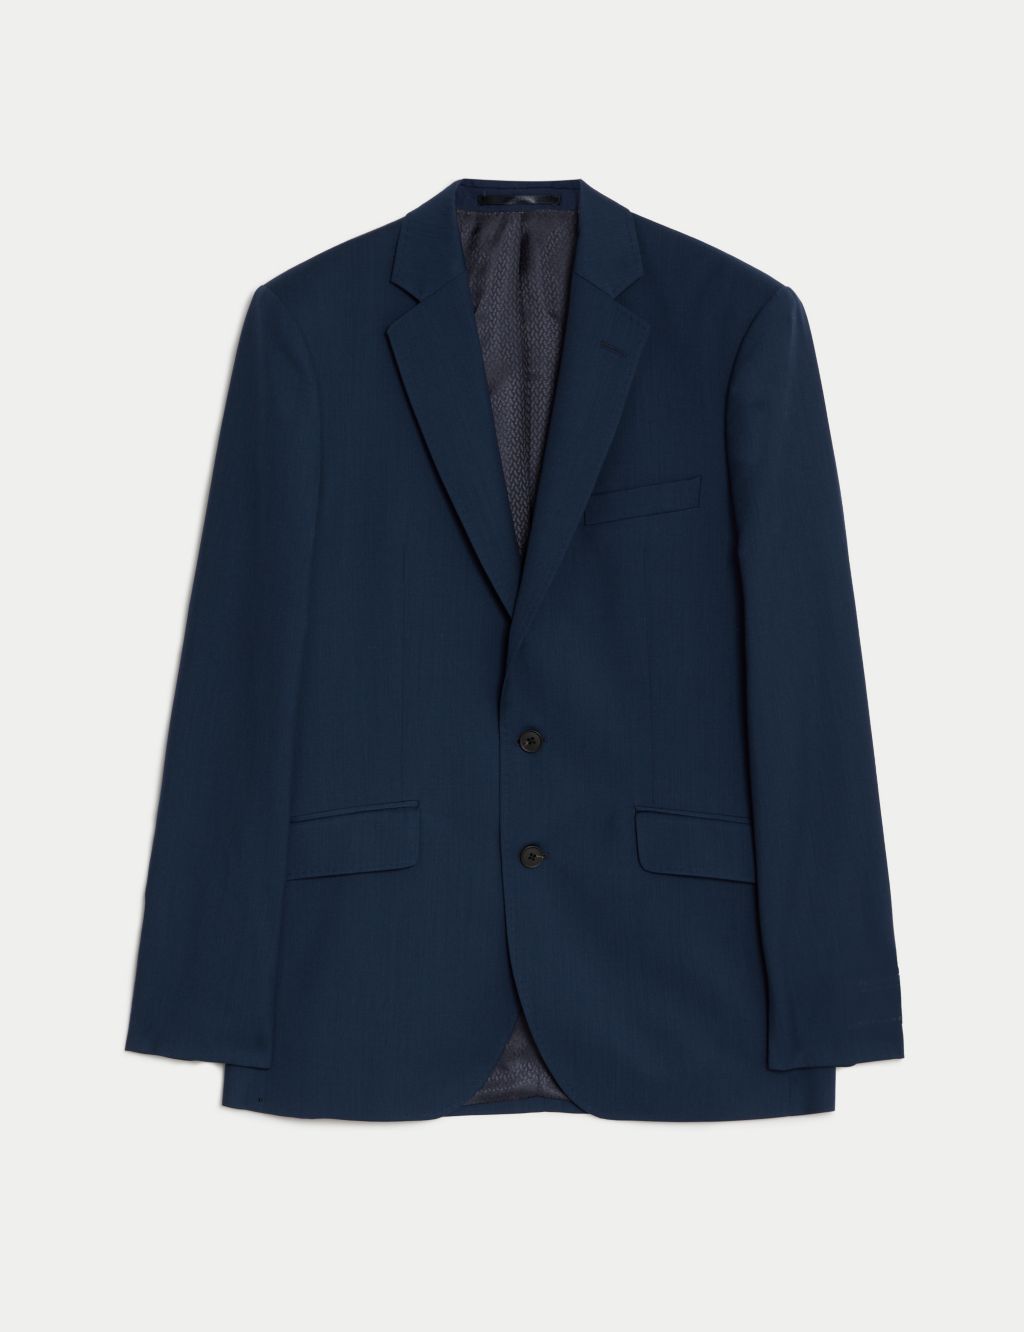 Tailored Fit Pure Wool Twill Jacket image 2